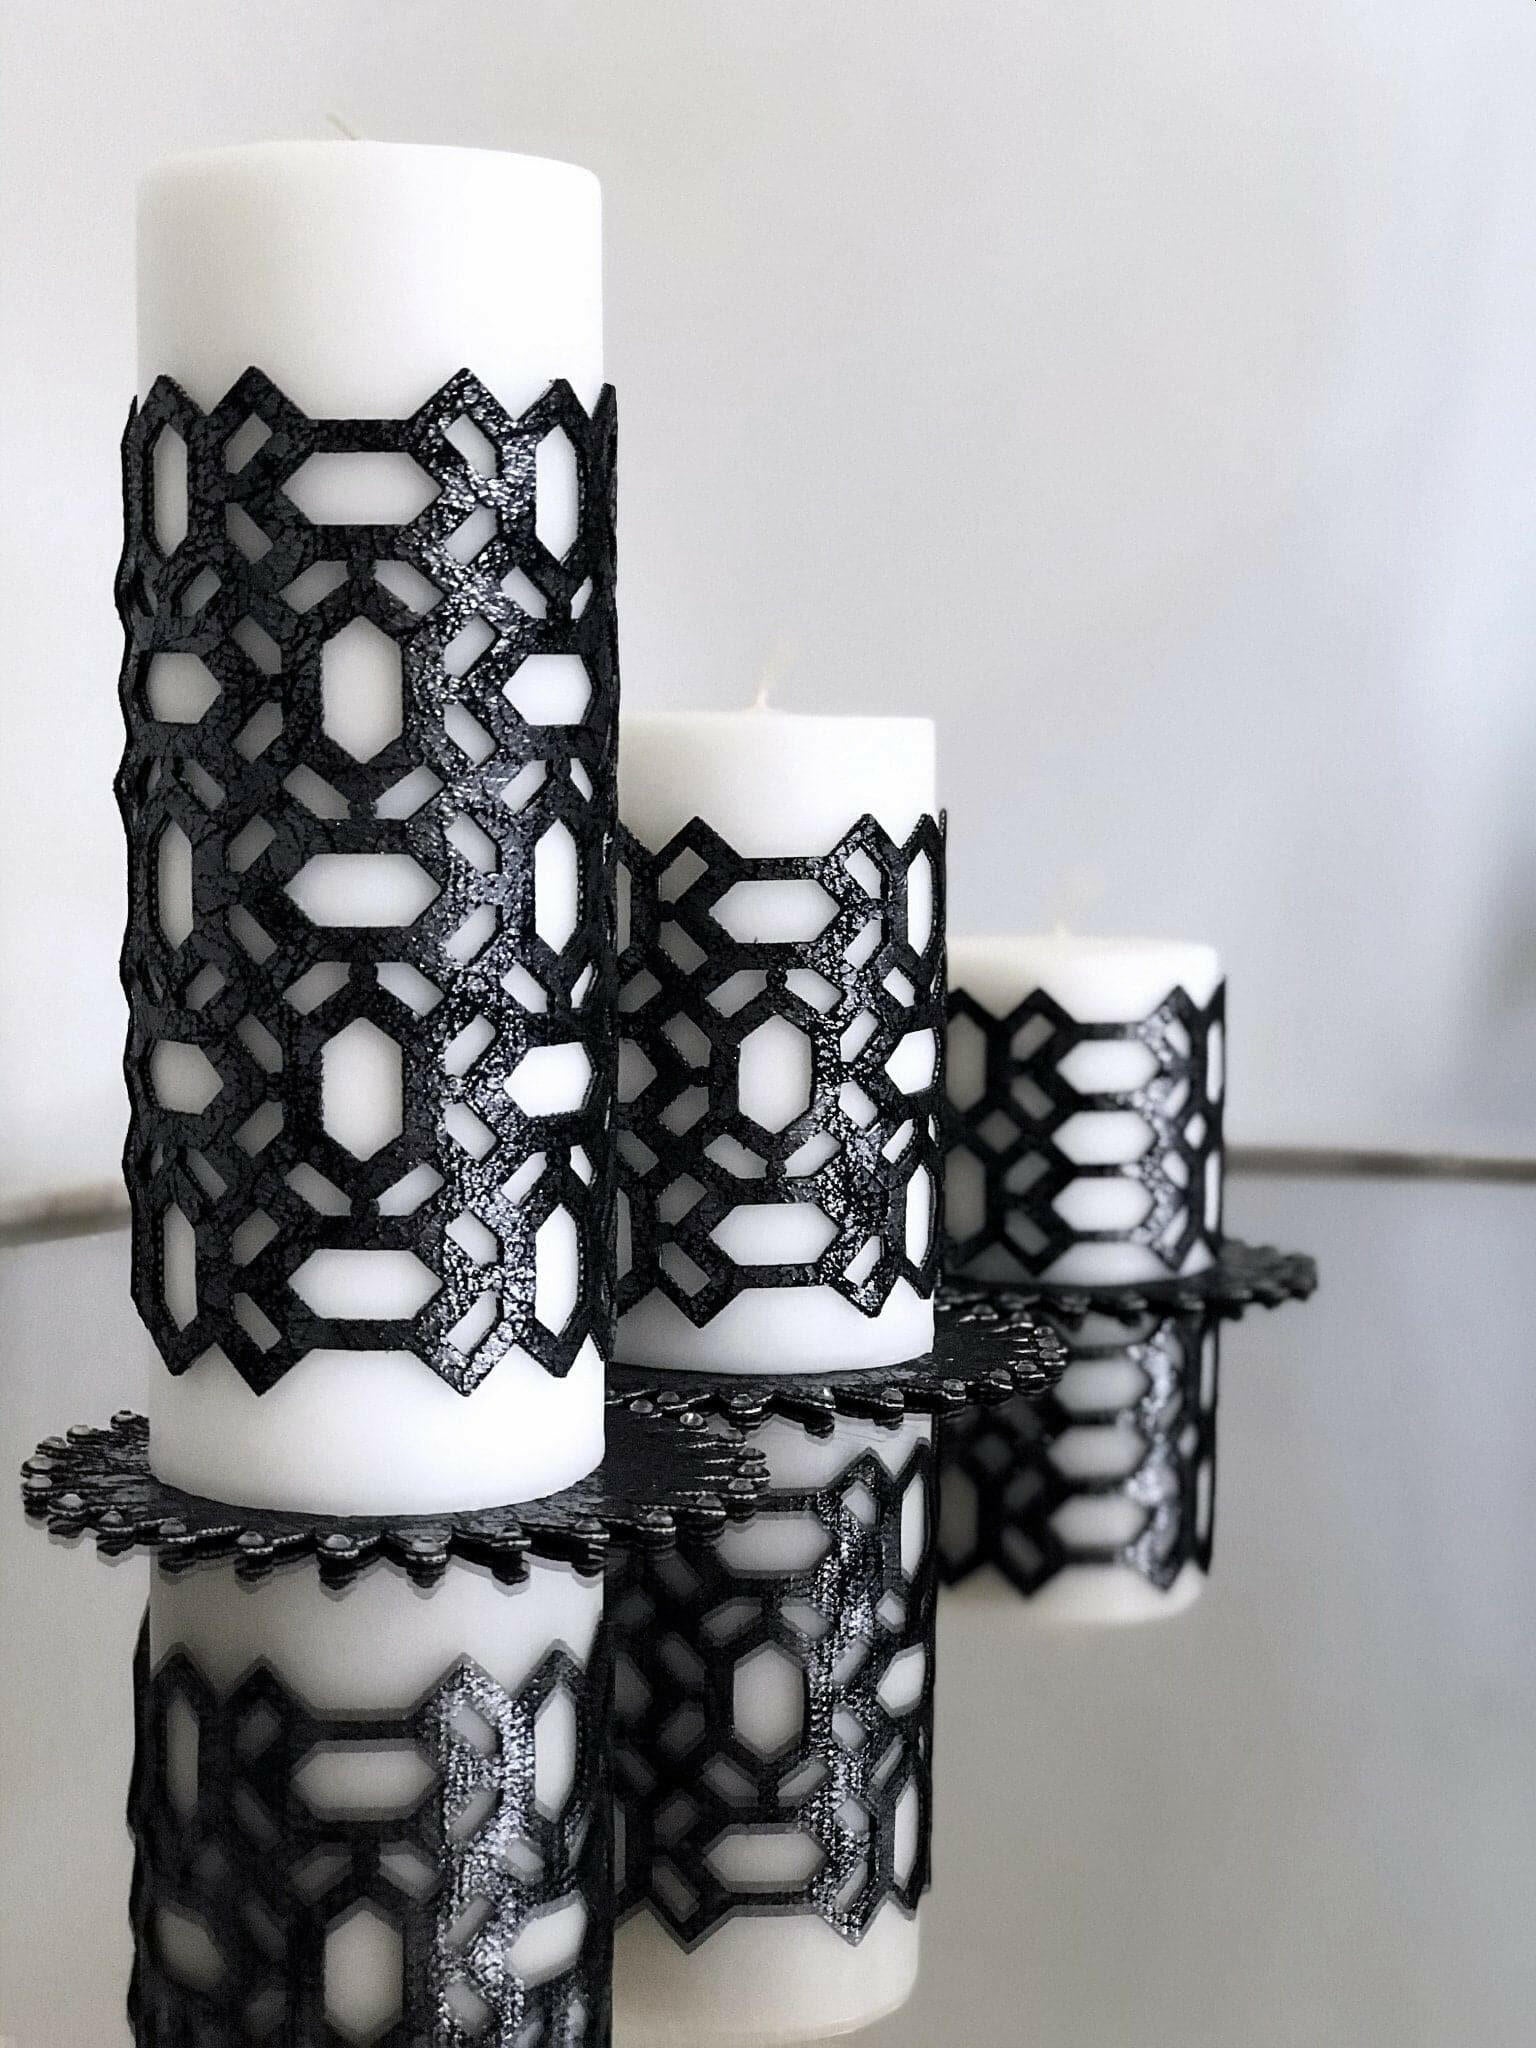 Petek Candle Set of 3 with Black Applique, Leather Geometric Pattern, Decorative Creative Home Designs Candles